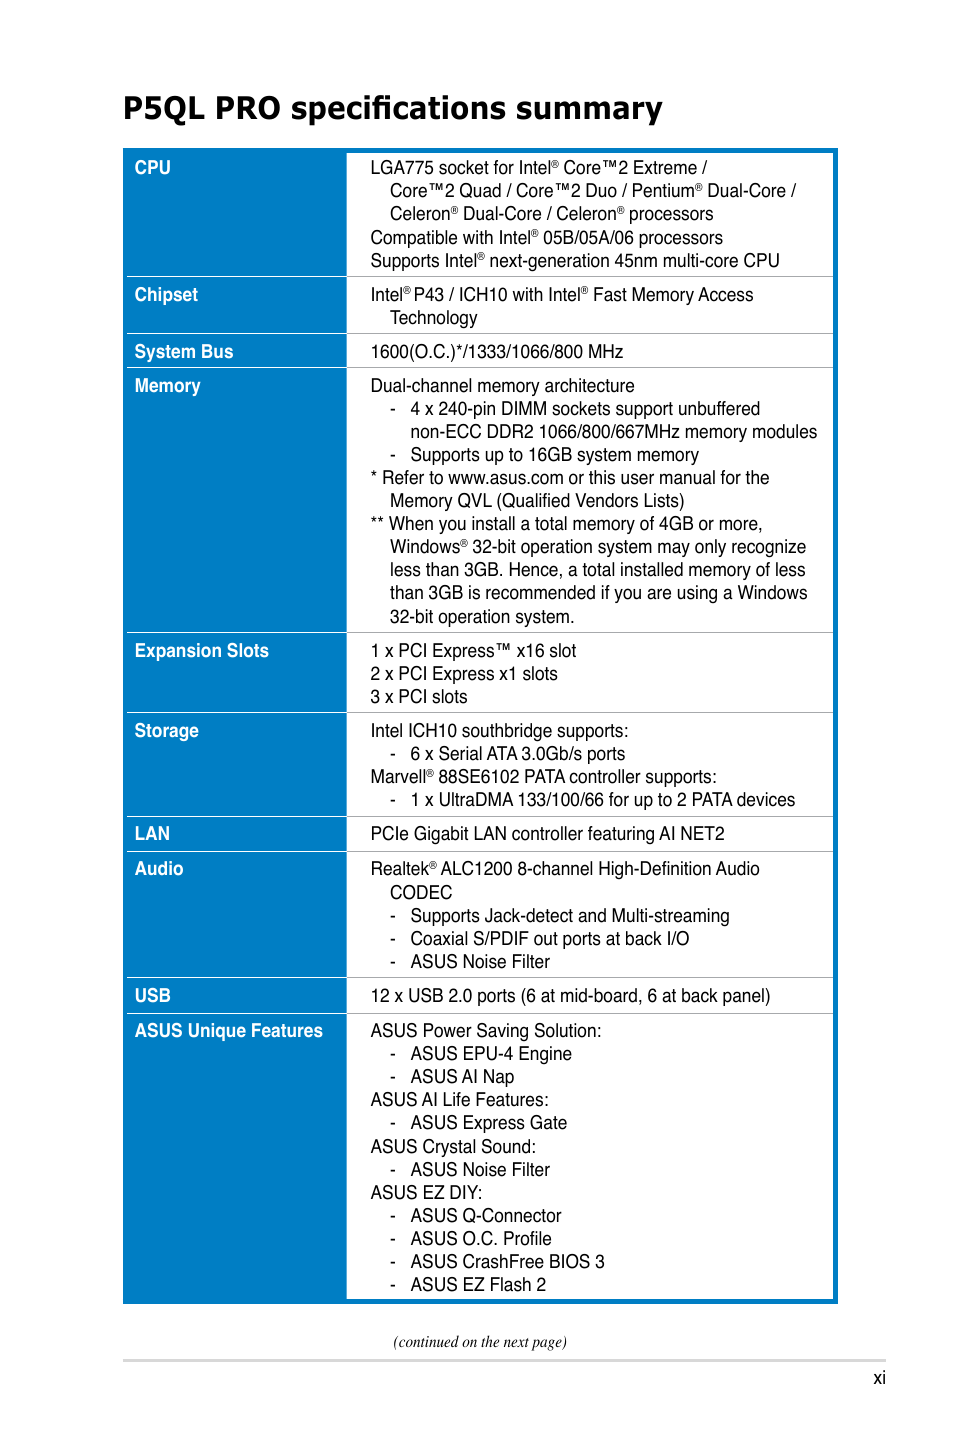 P5ql pro specifications summary | Asus P5QL PRO User Manual | Page 11 / 148  | Original mode